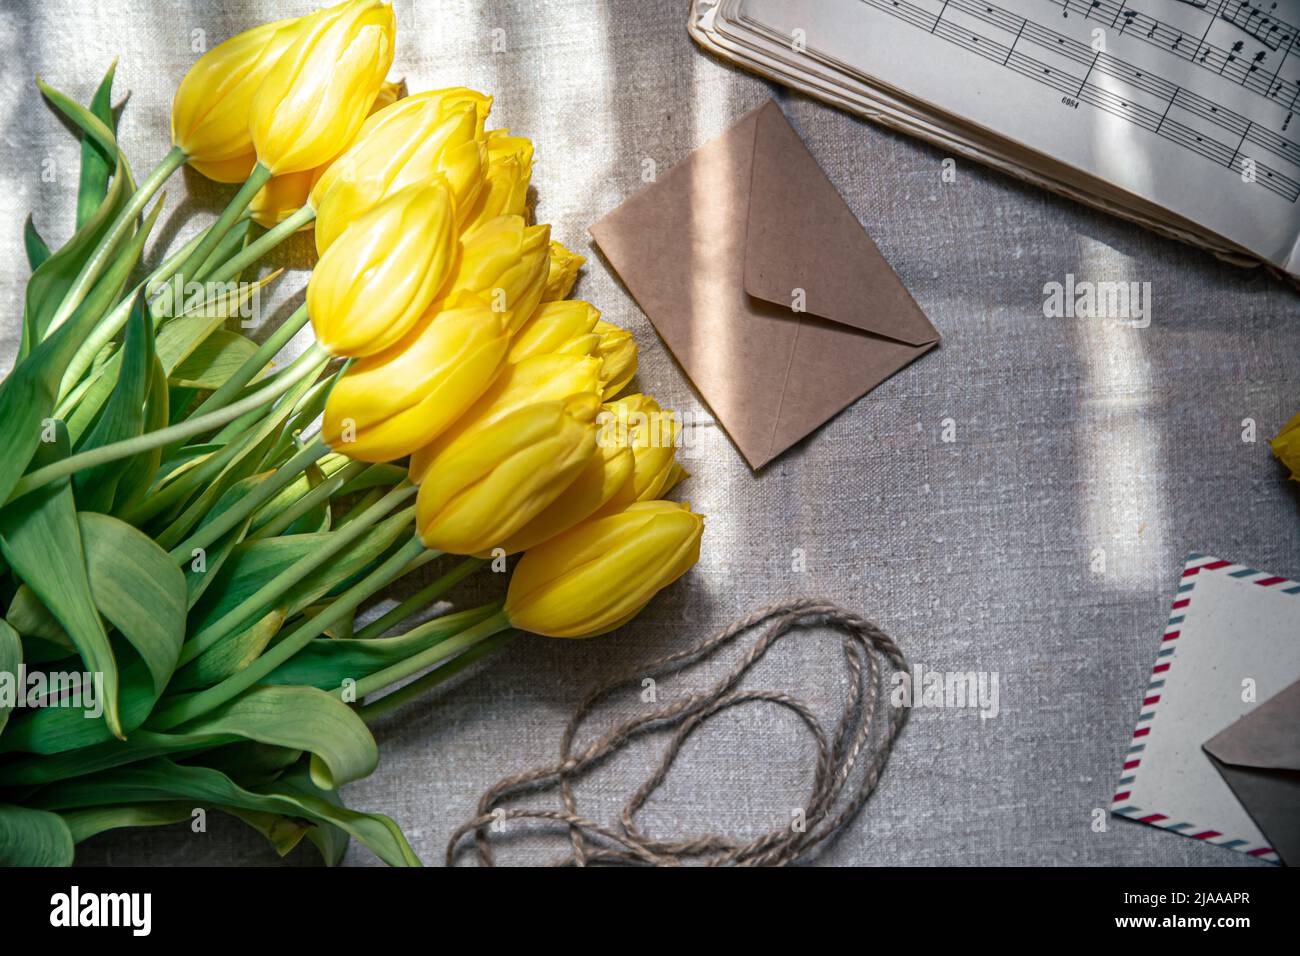 Flat lay, yellow tulips, envelopes and music notes. Stock Photo